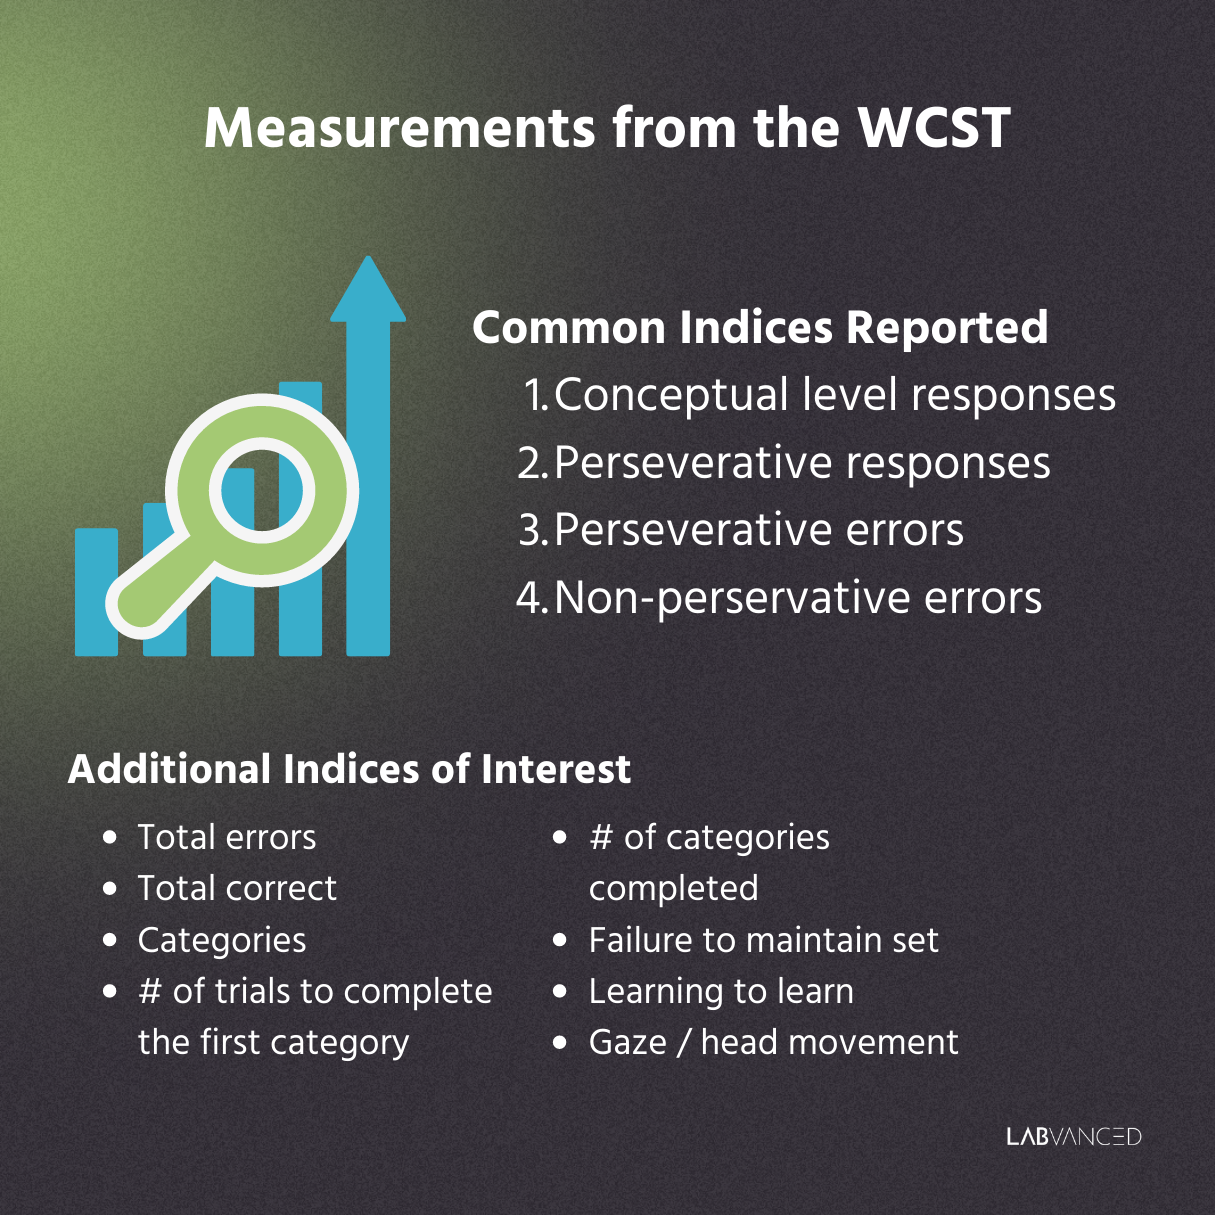 Infographic about the different measurements and Indices reported from the WCST, such as conceptual level responses or perseverative responses.